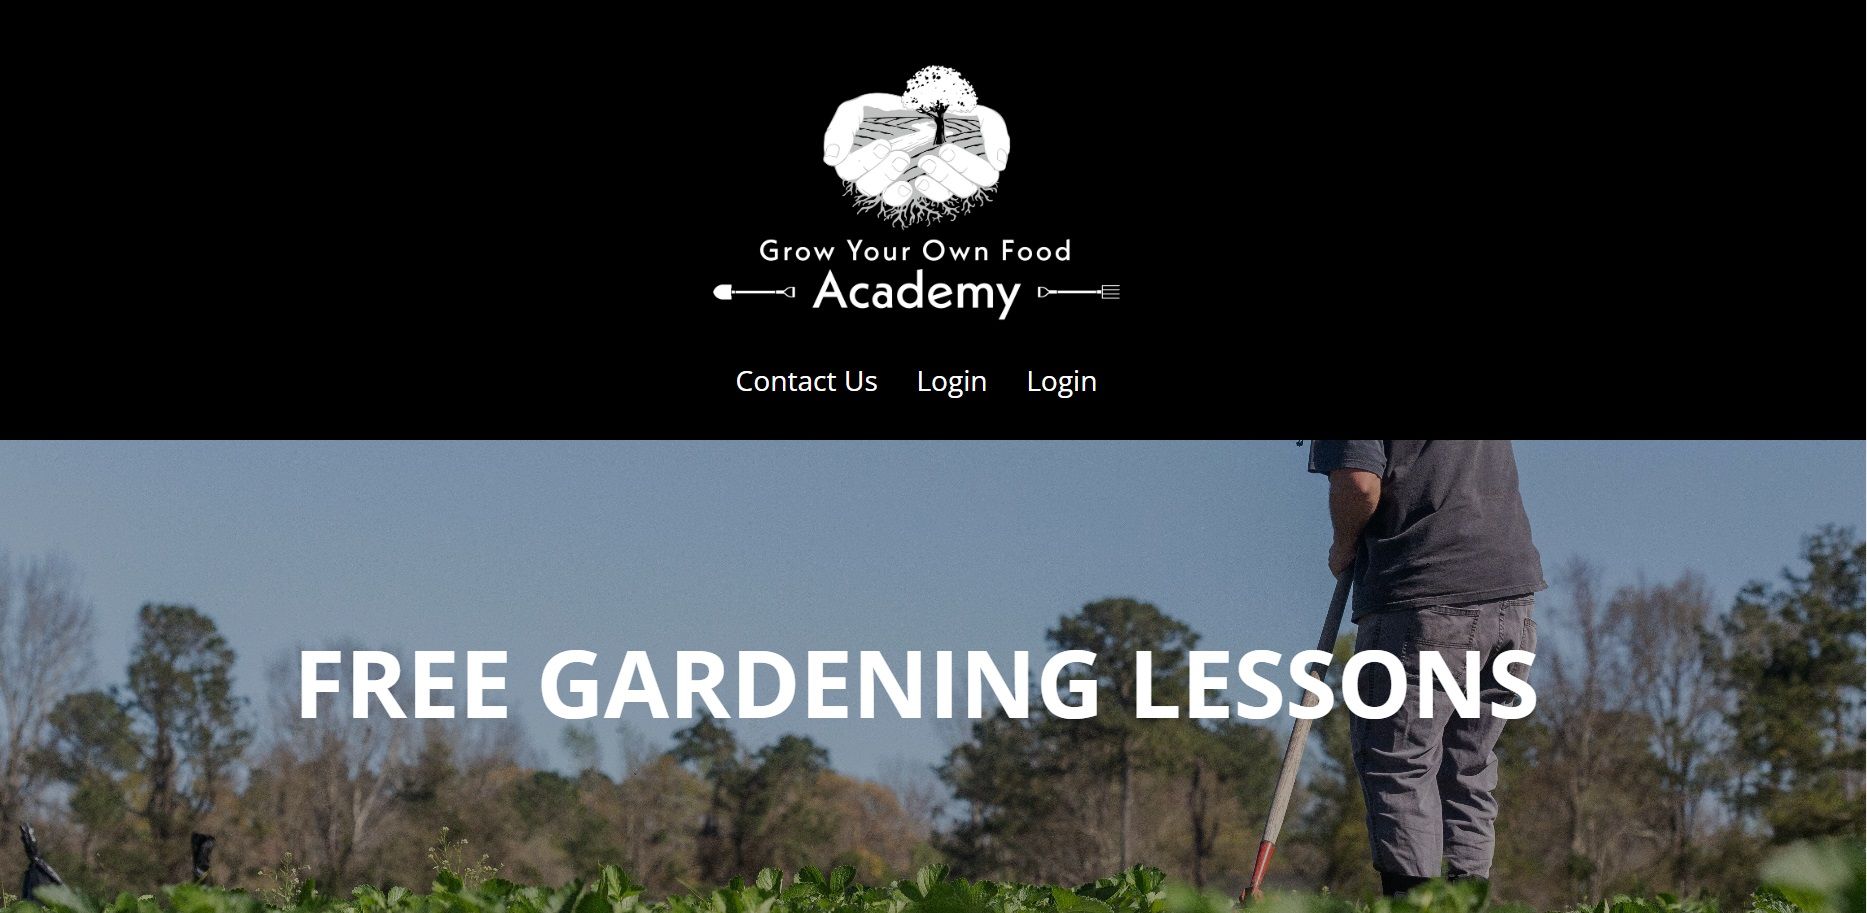 Lessons page on Grow Your Own Food website